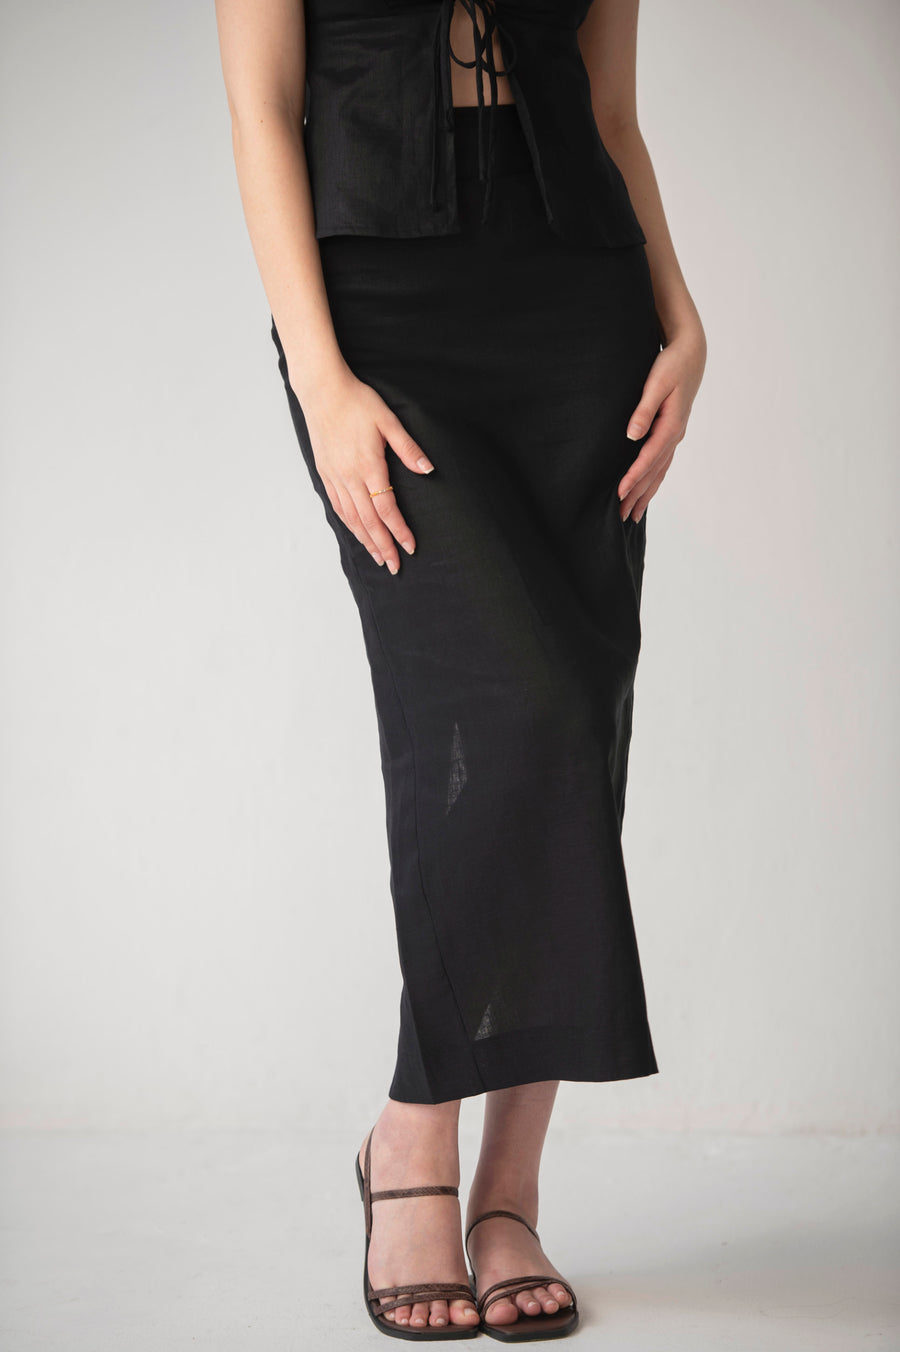 The Maxi Pencil Skirt in Black